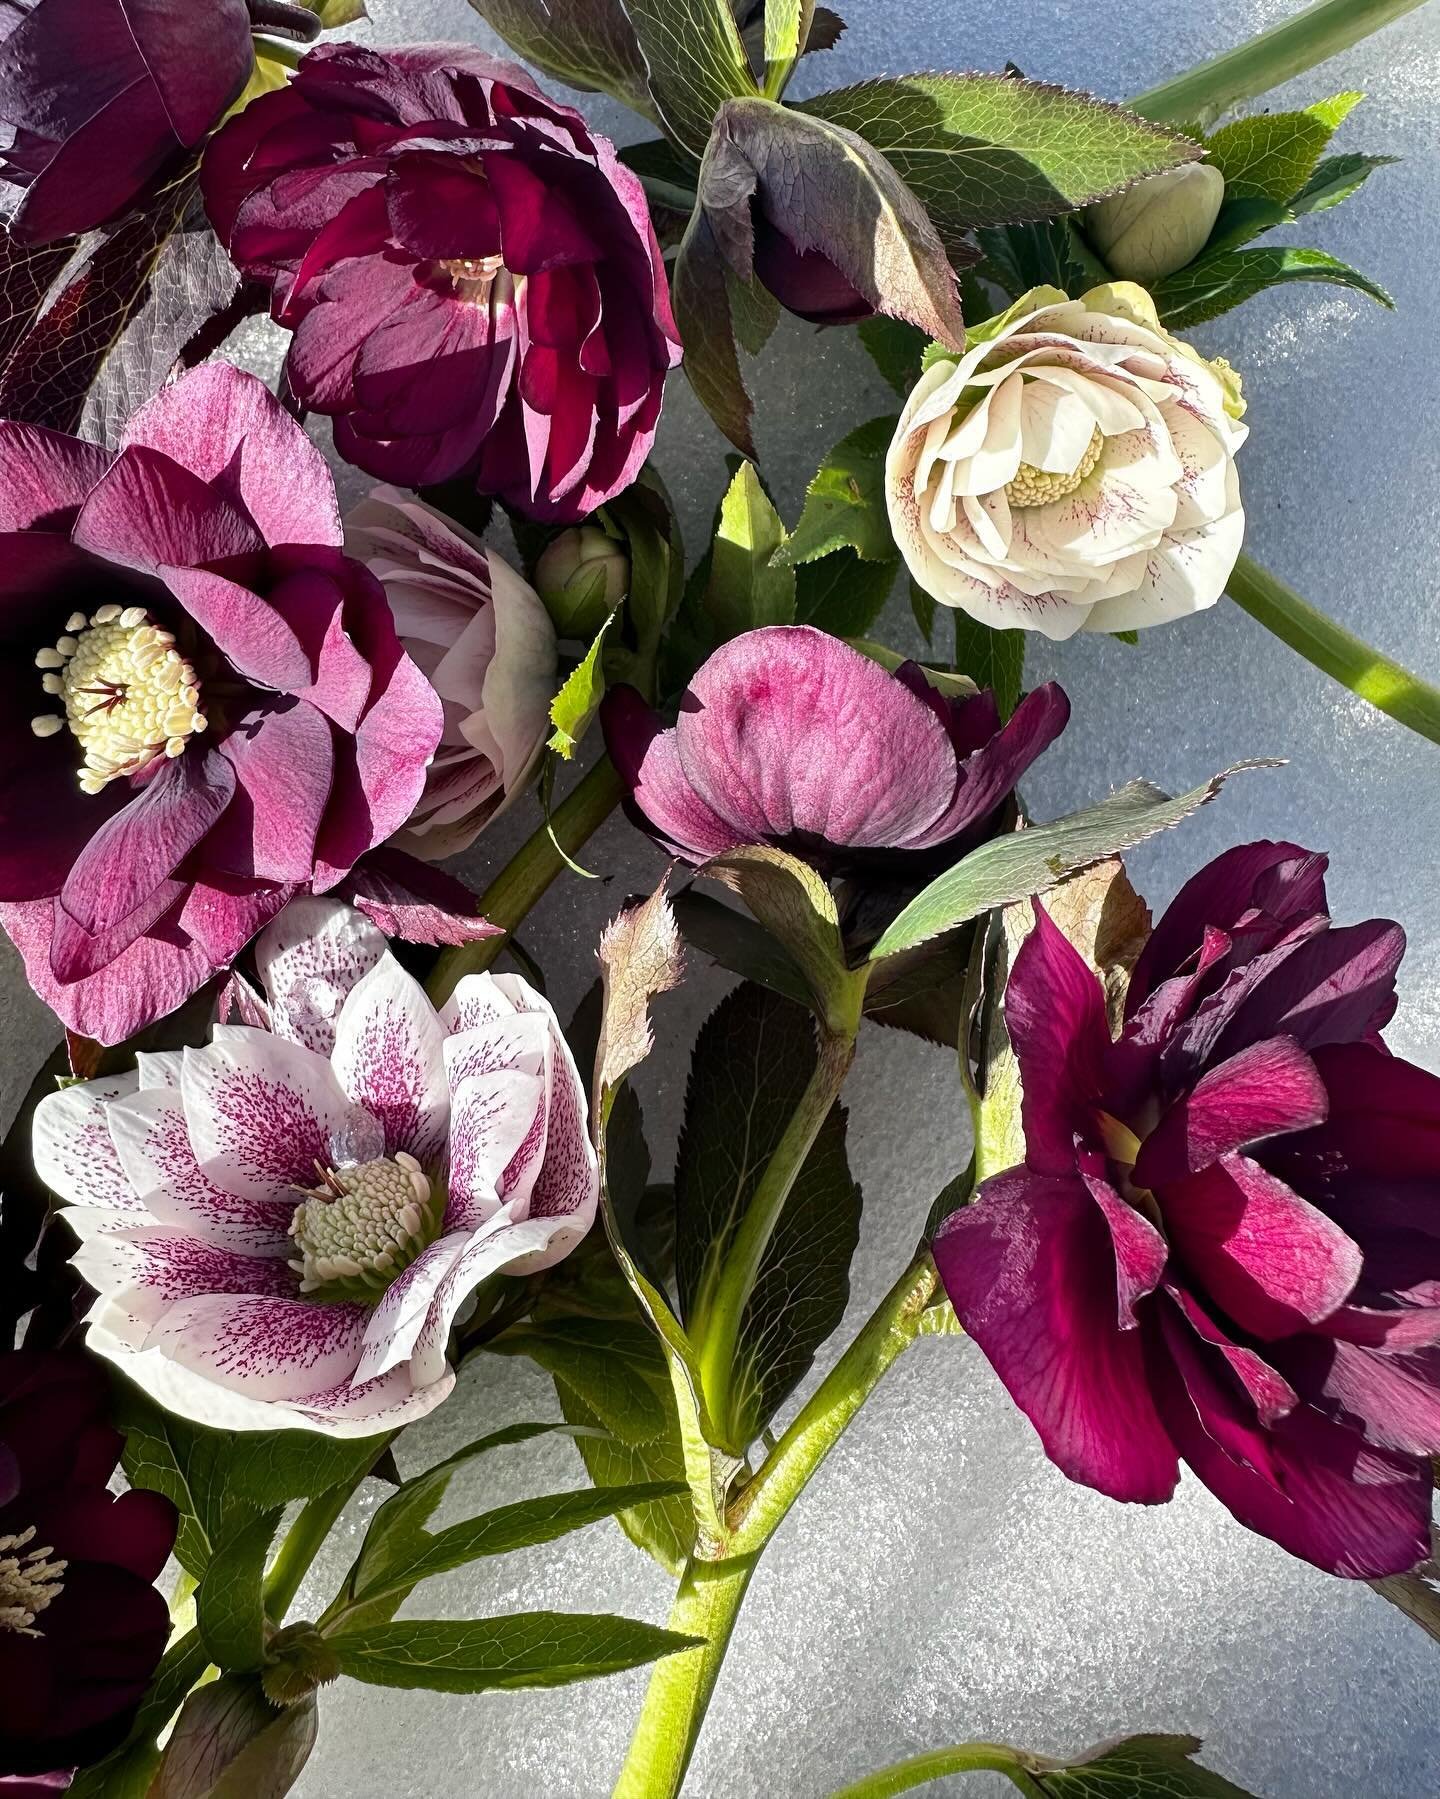 Hellebores I picked this morning.  There is magic in the air today. It feels so beautiful knowing that many (hundreds of thousands? millions?) people are anticipating the eclipse today with a sense of wonder and mystery.  This is my kind of holiday.